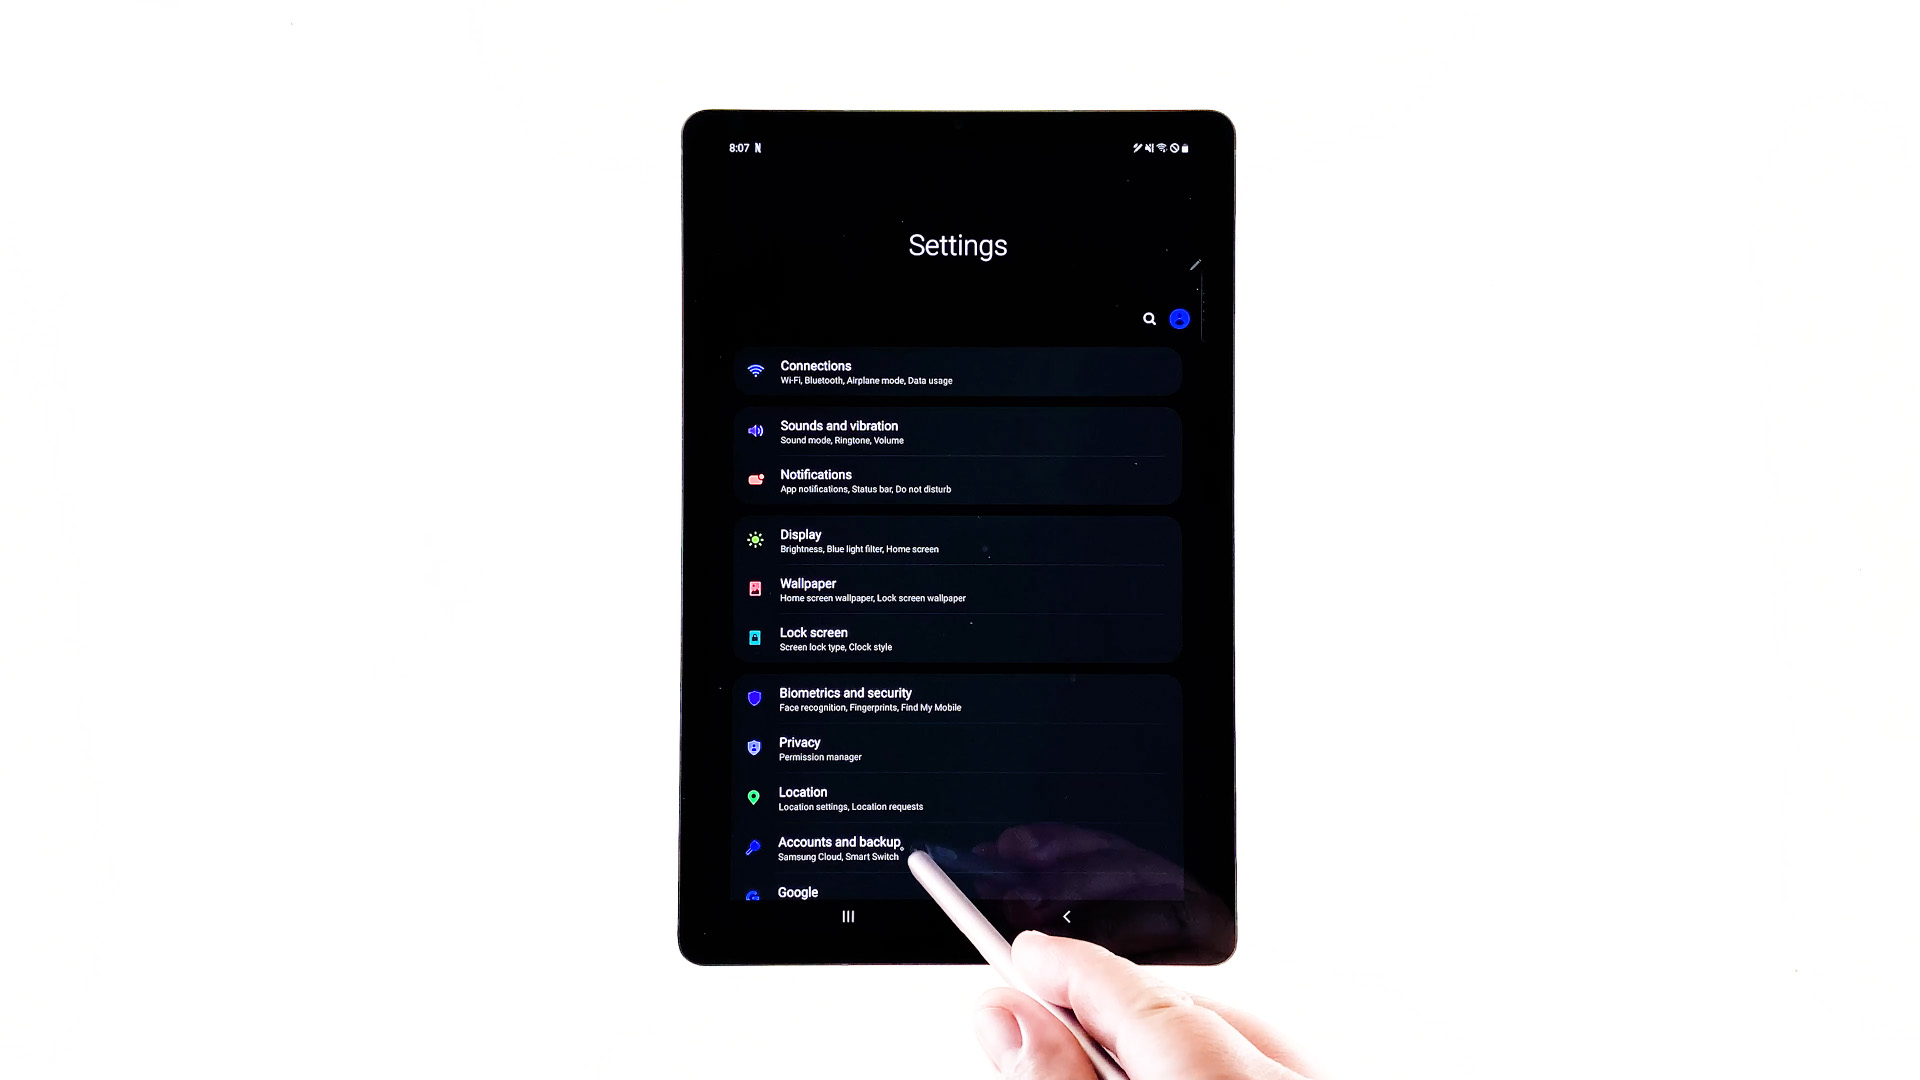 sync tab s6 contacts with samsung cloud - accounts and backup